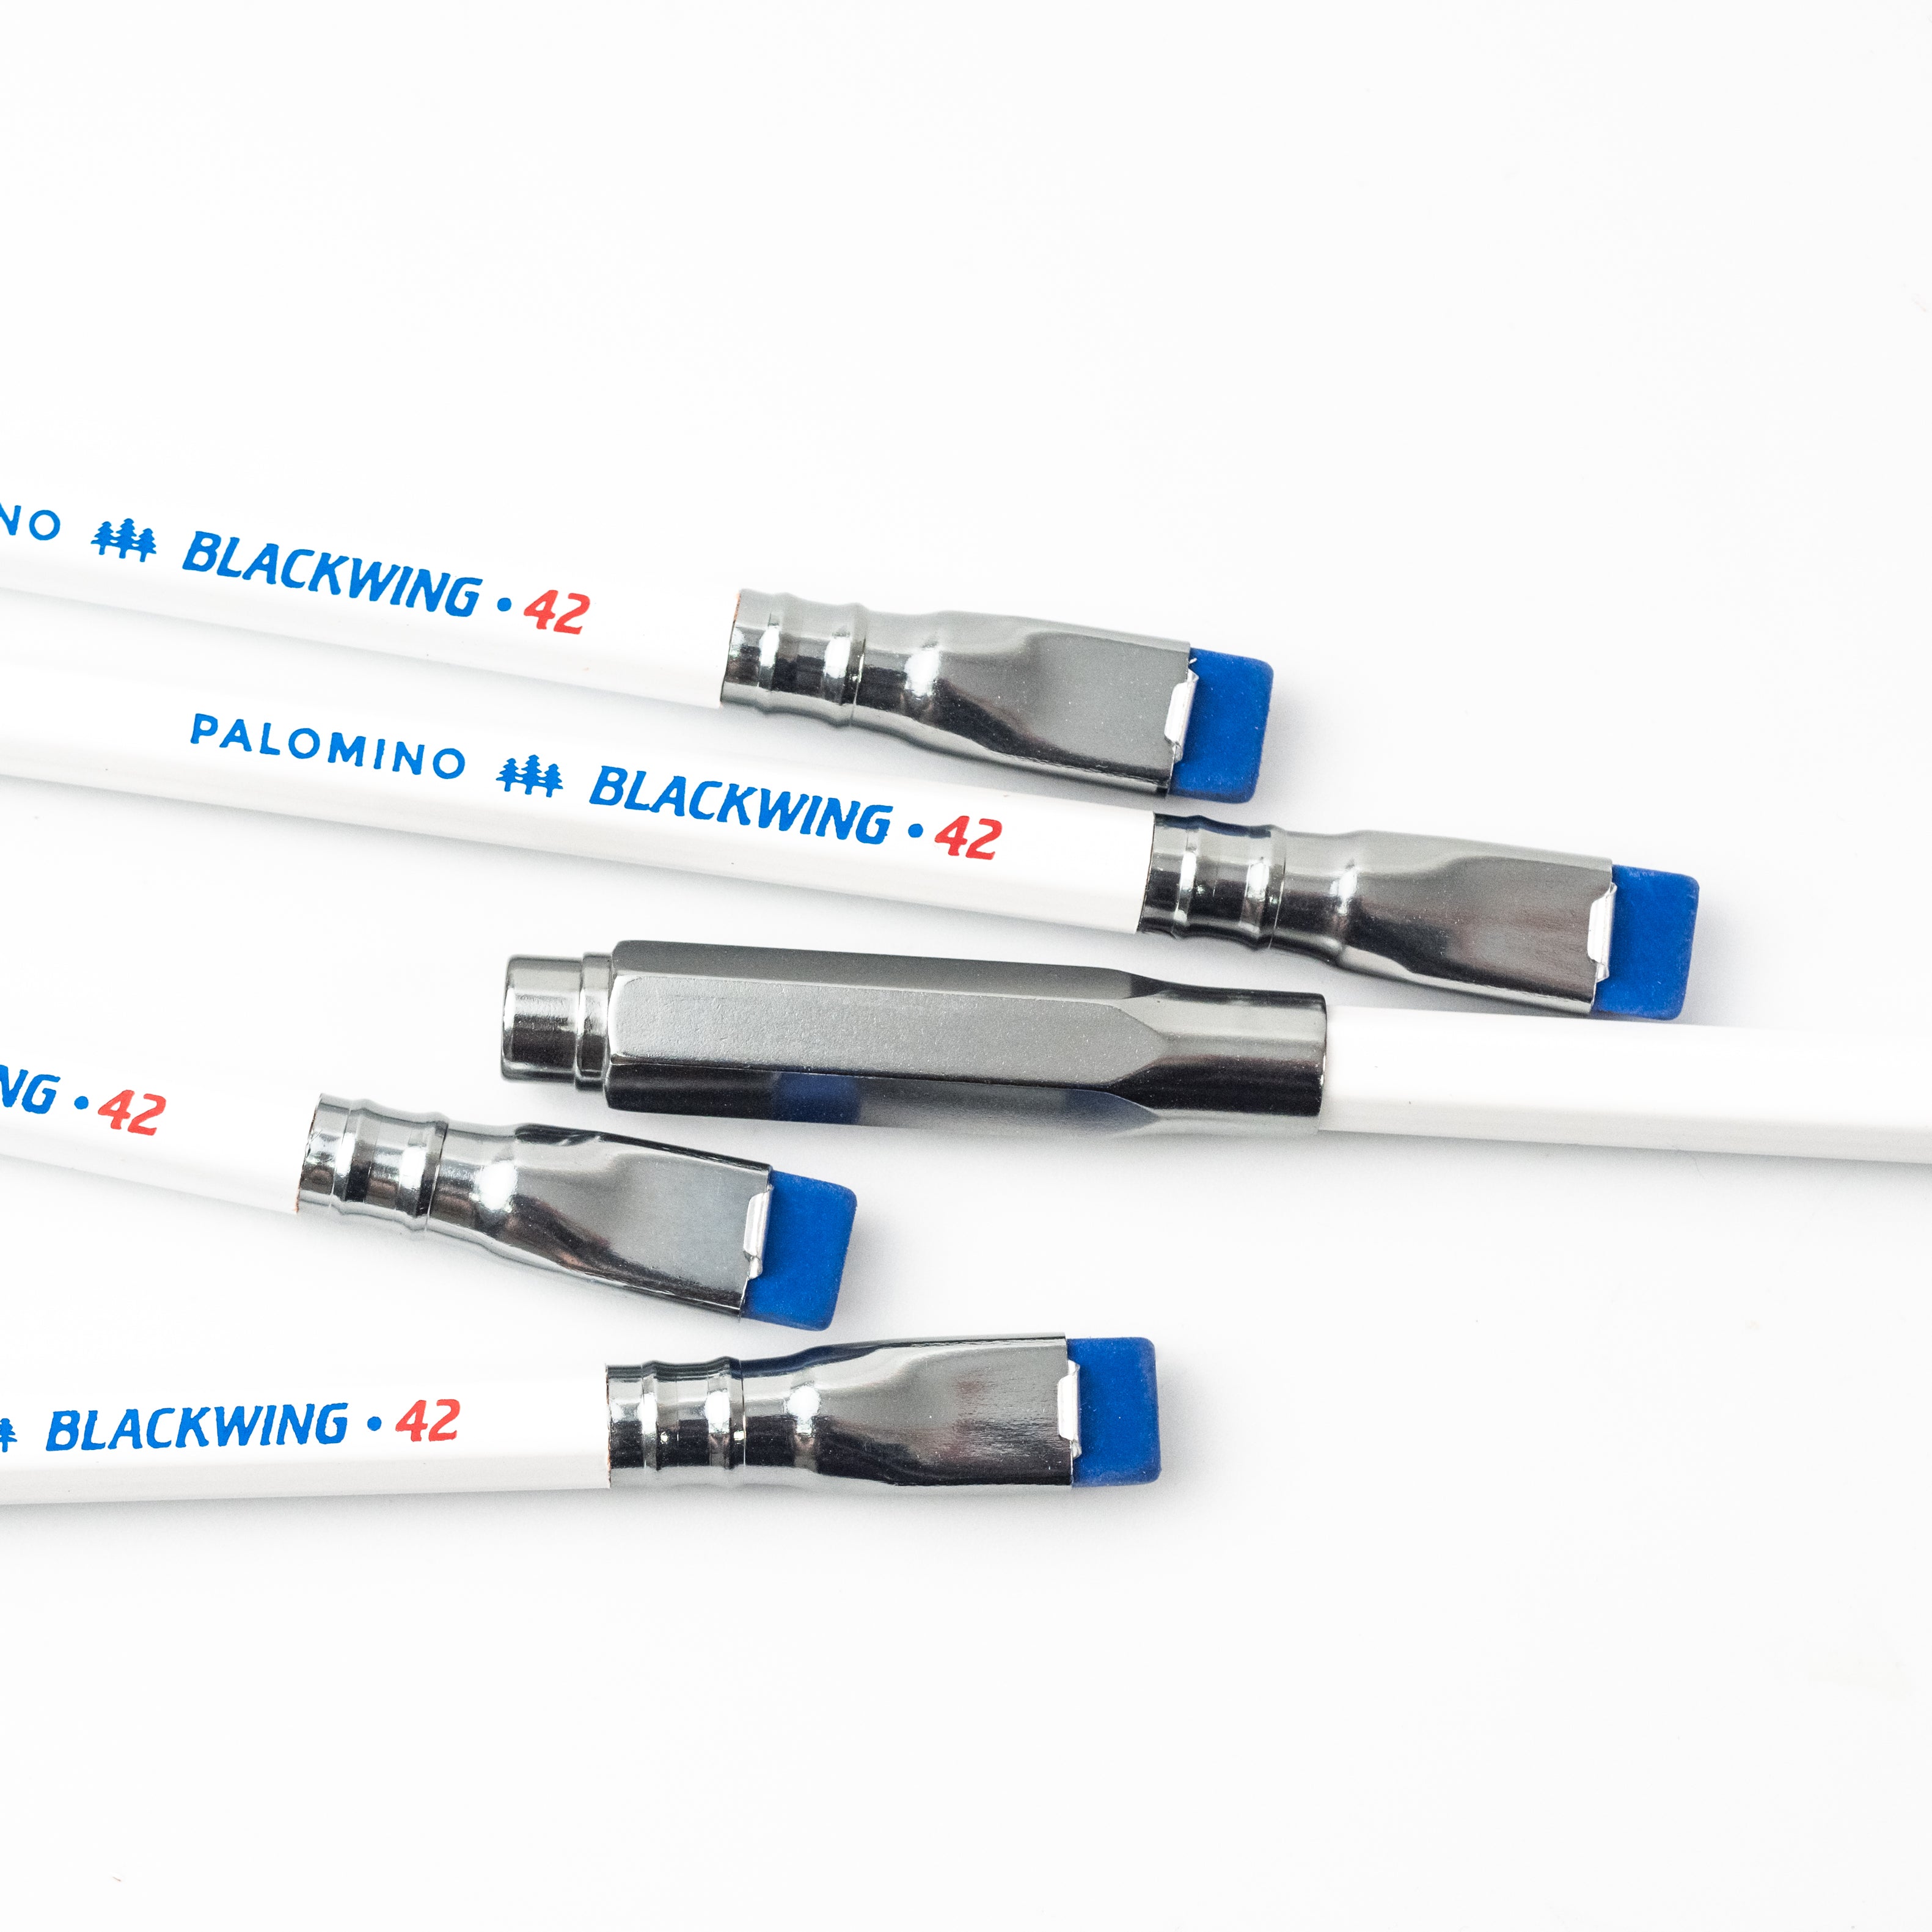 A set of Blackwing Volume 42 pencils rest on a white surface.